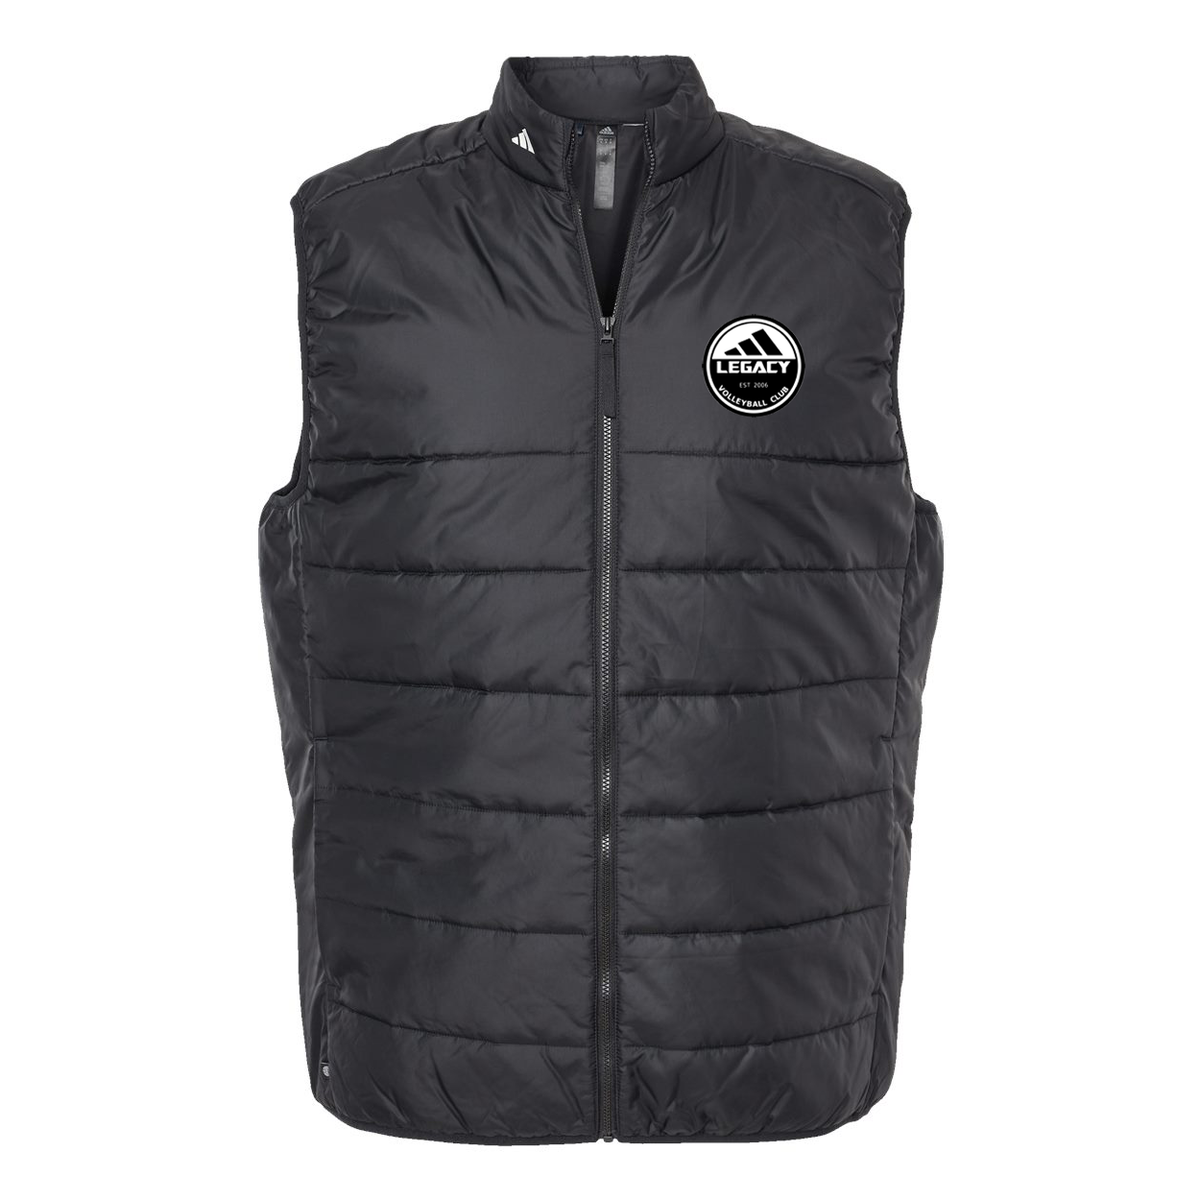 Legacy Volleyball Club Adidas Men's Puffer Vest